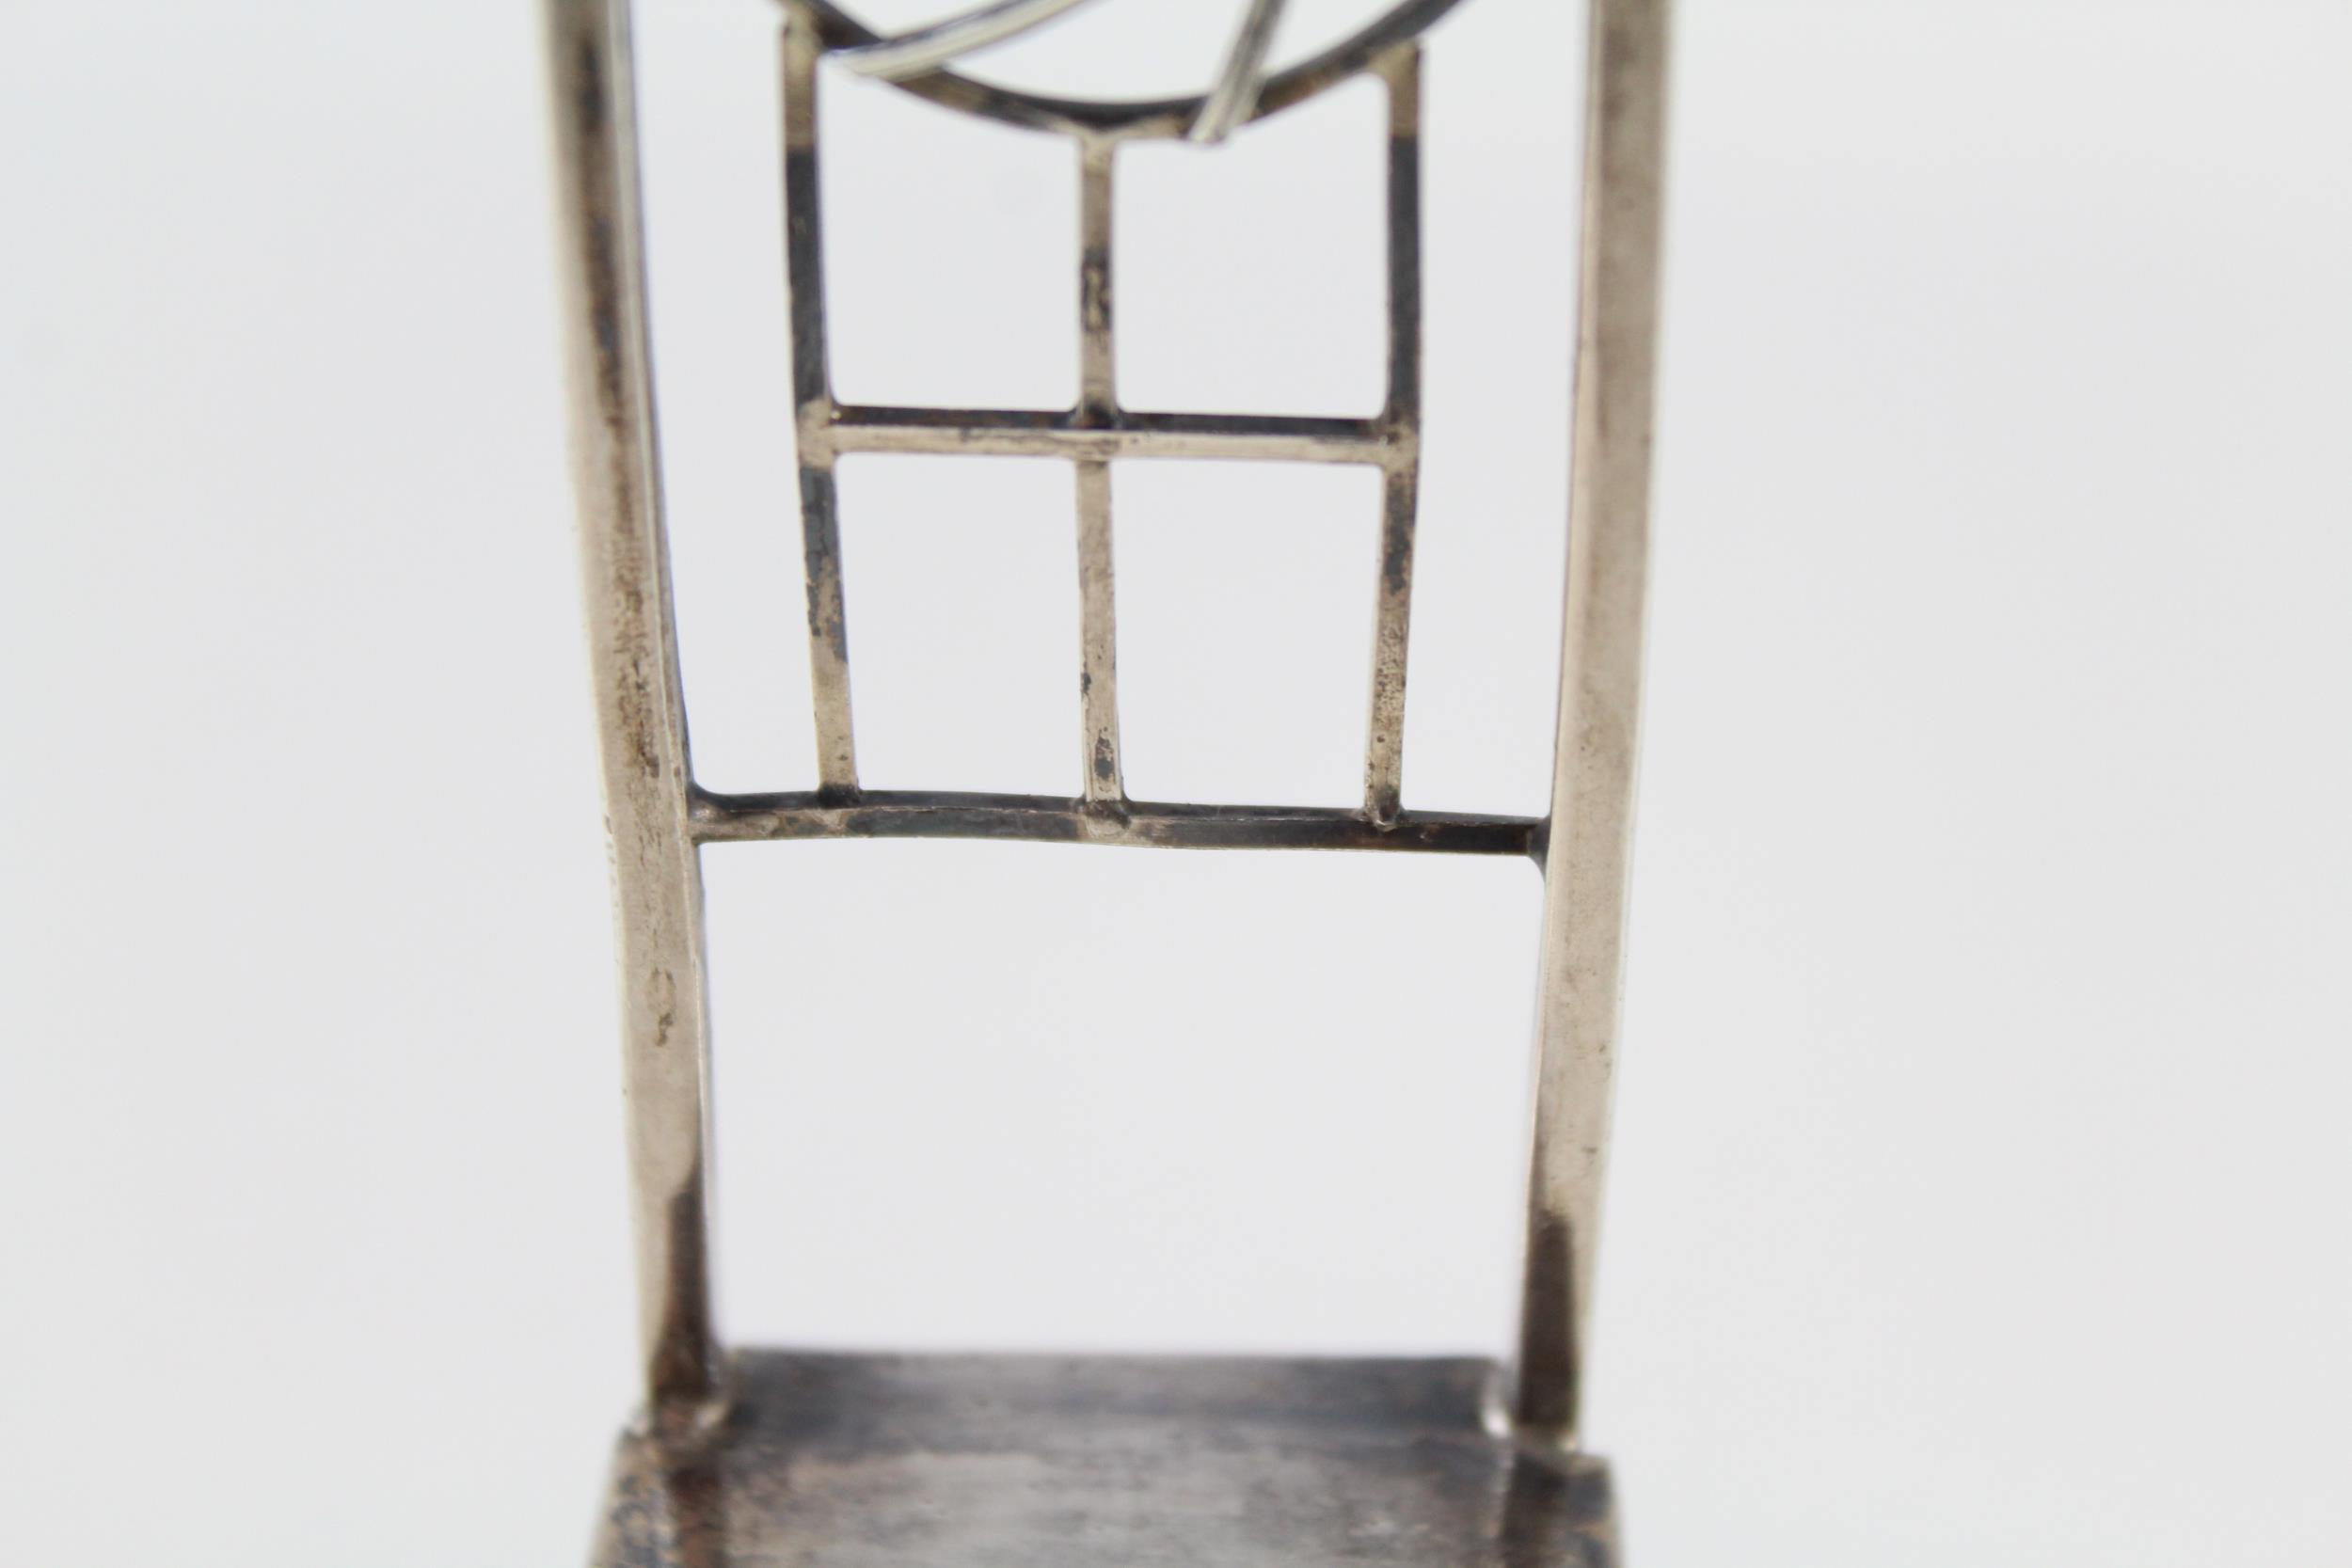 Vintage .925 Sterling Silver Art Nouveau Style Miniature Chair (30g) - XRF TESTED FOR PURITY - Image 3 of 7